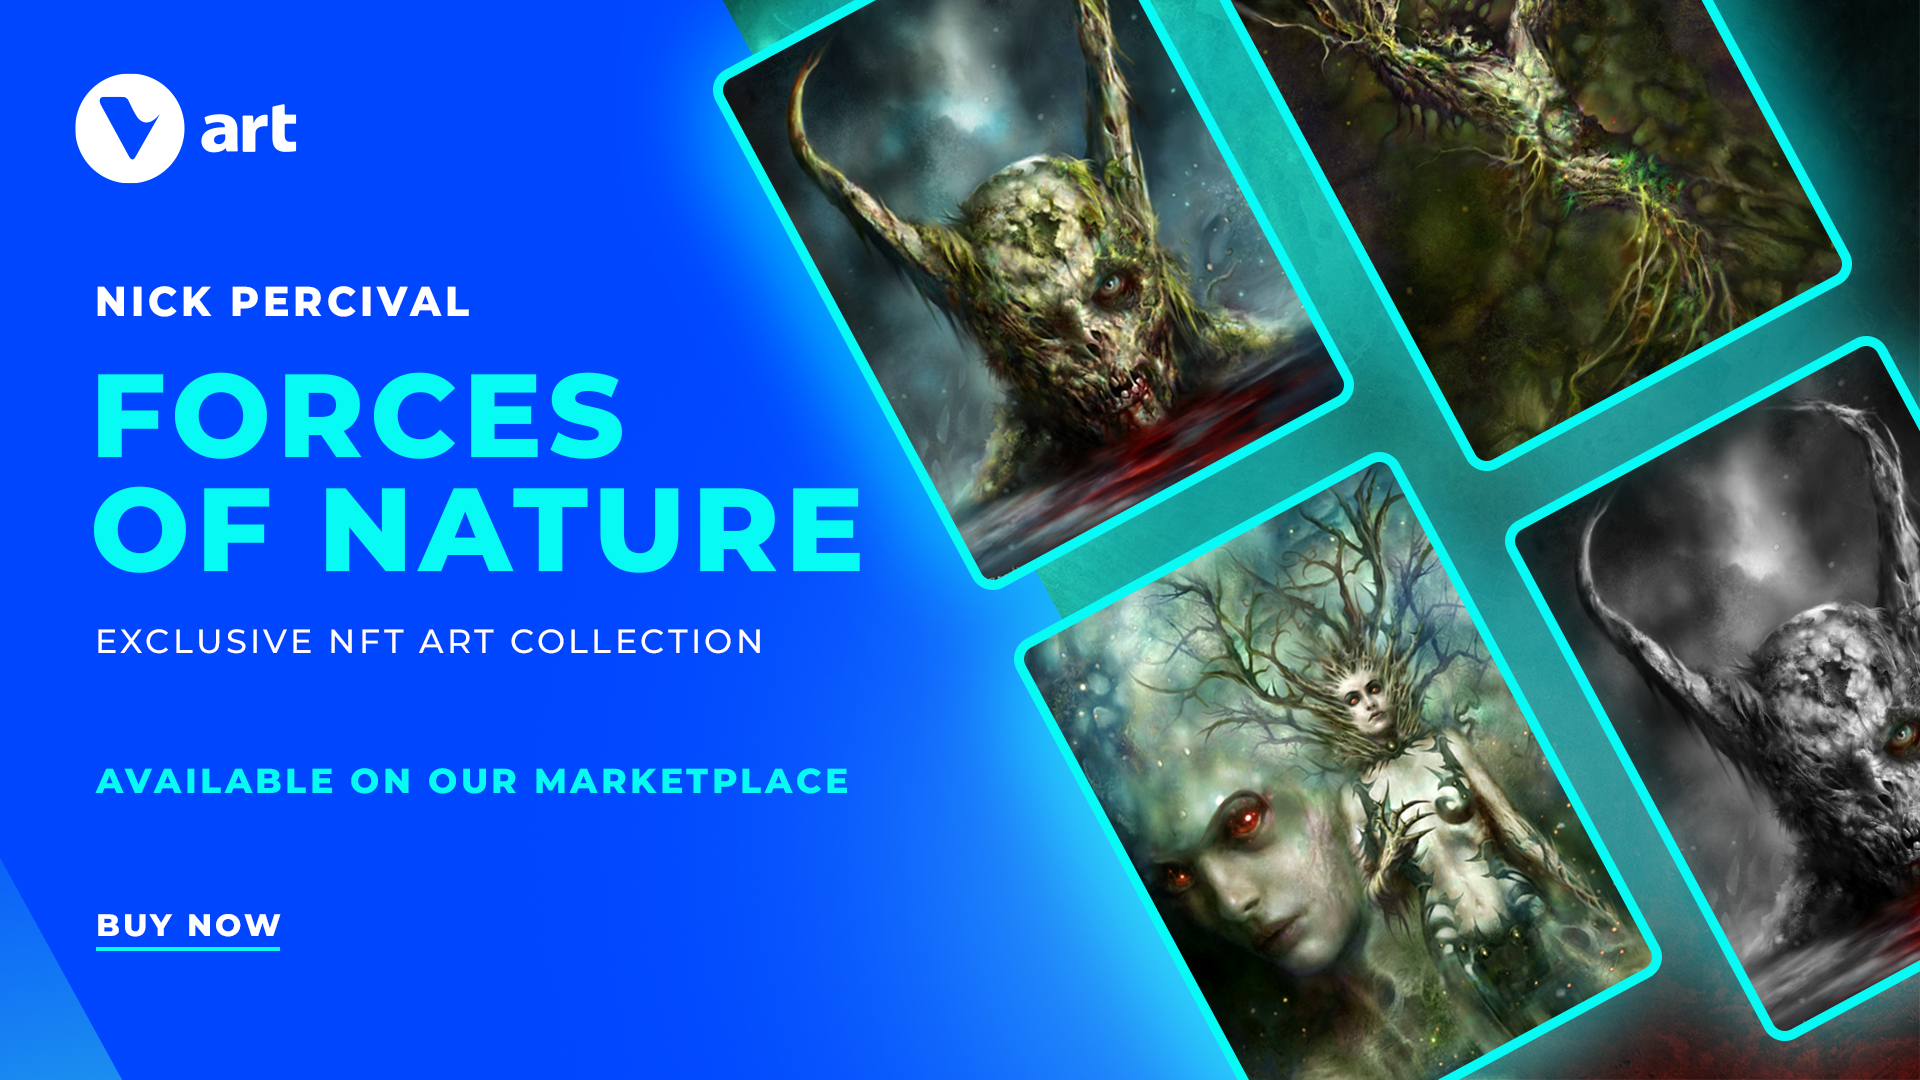 Nick Percival Forces of Nature NFT Art Collection Virtua Featured Image